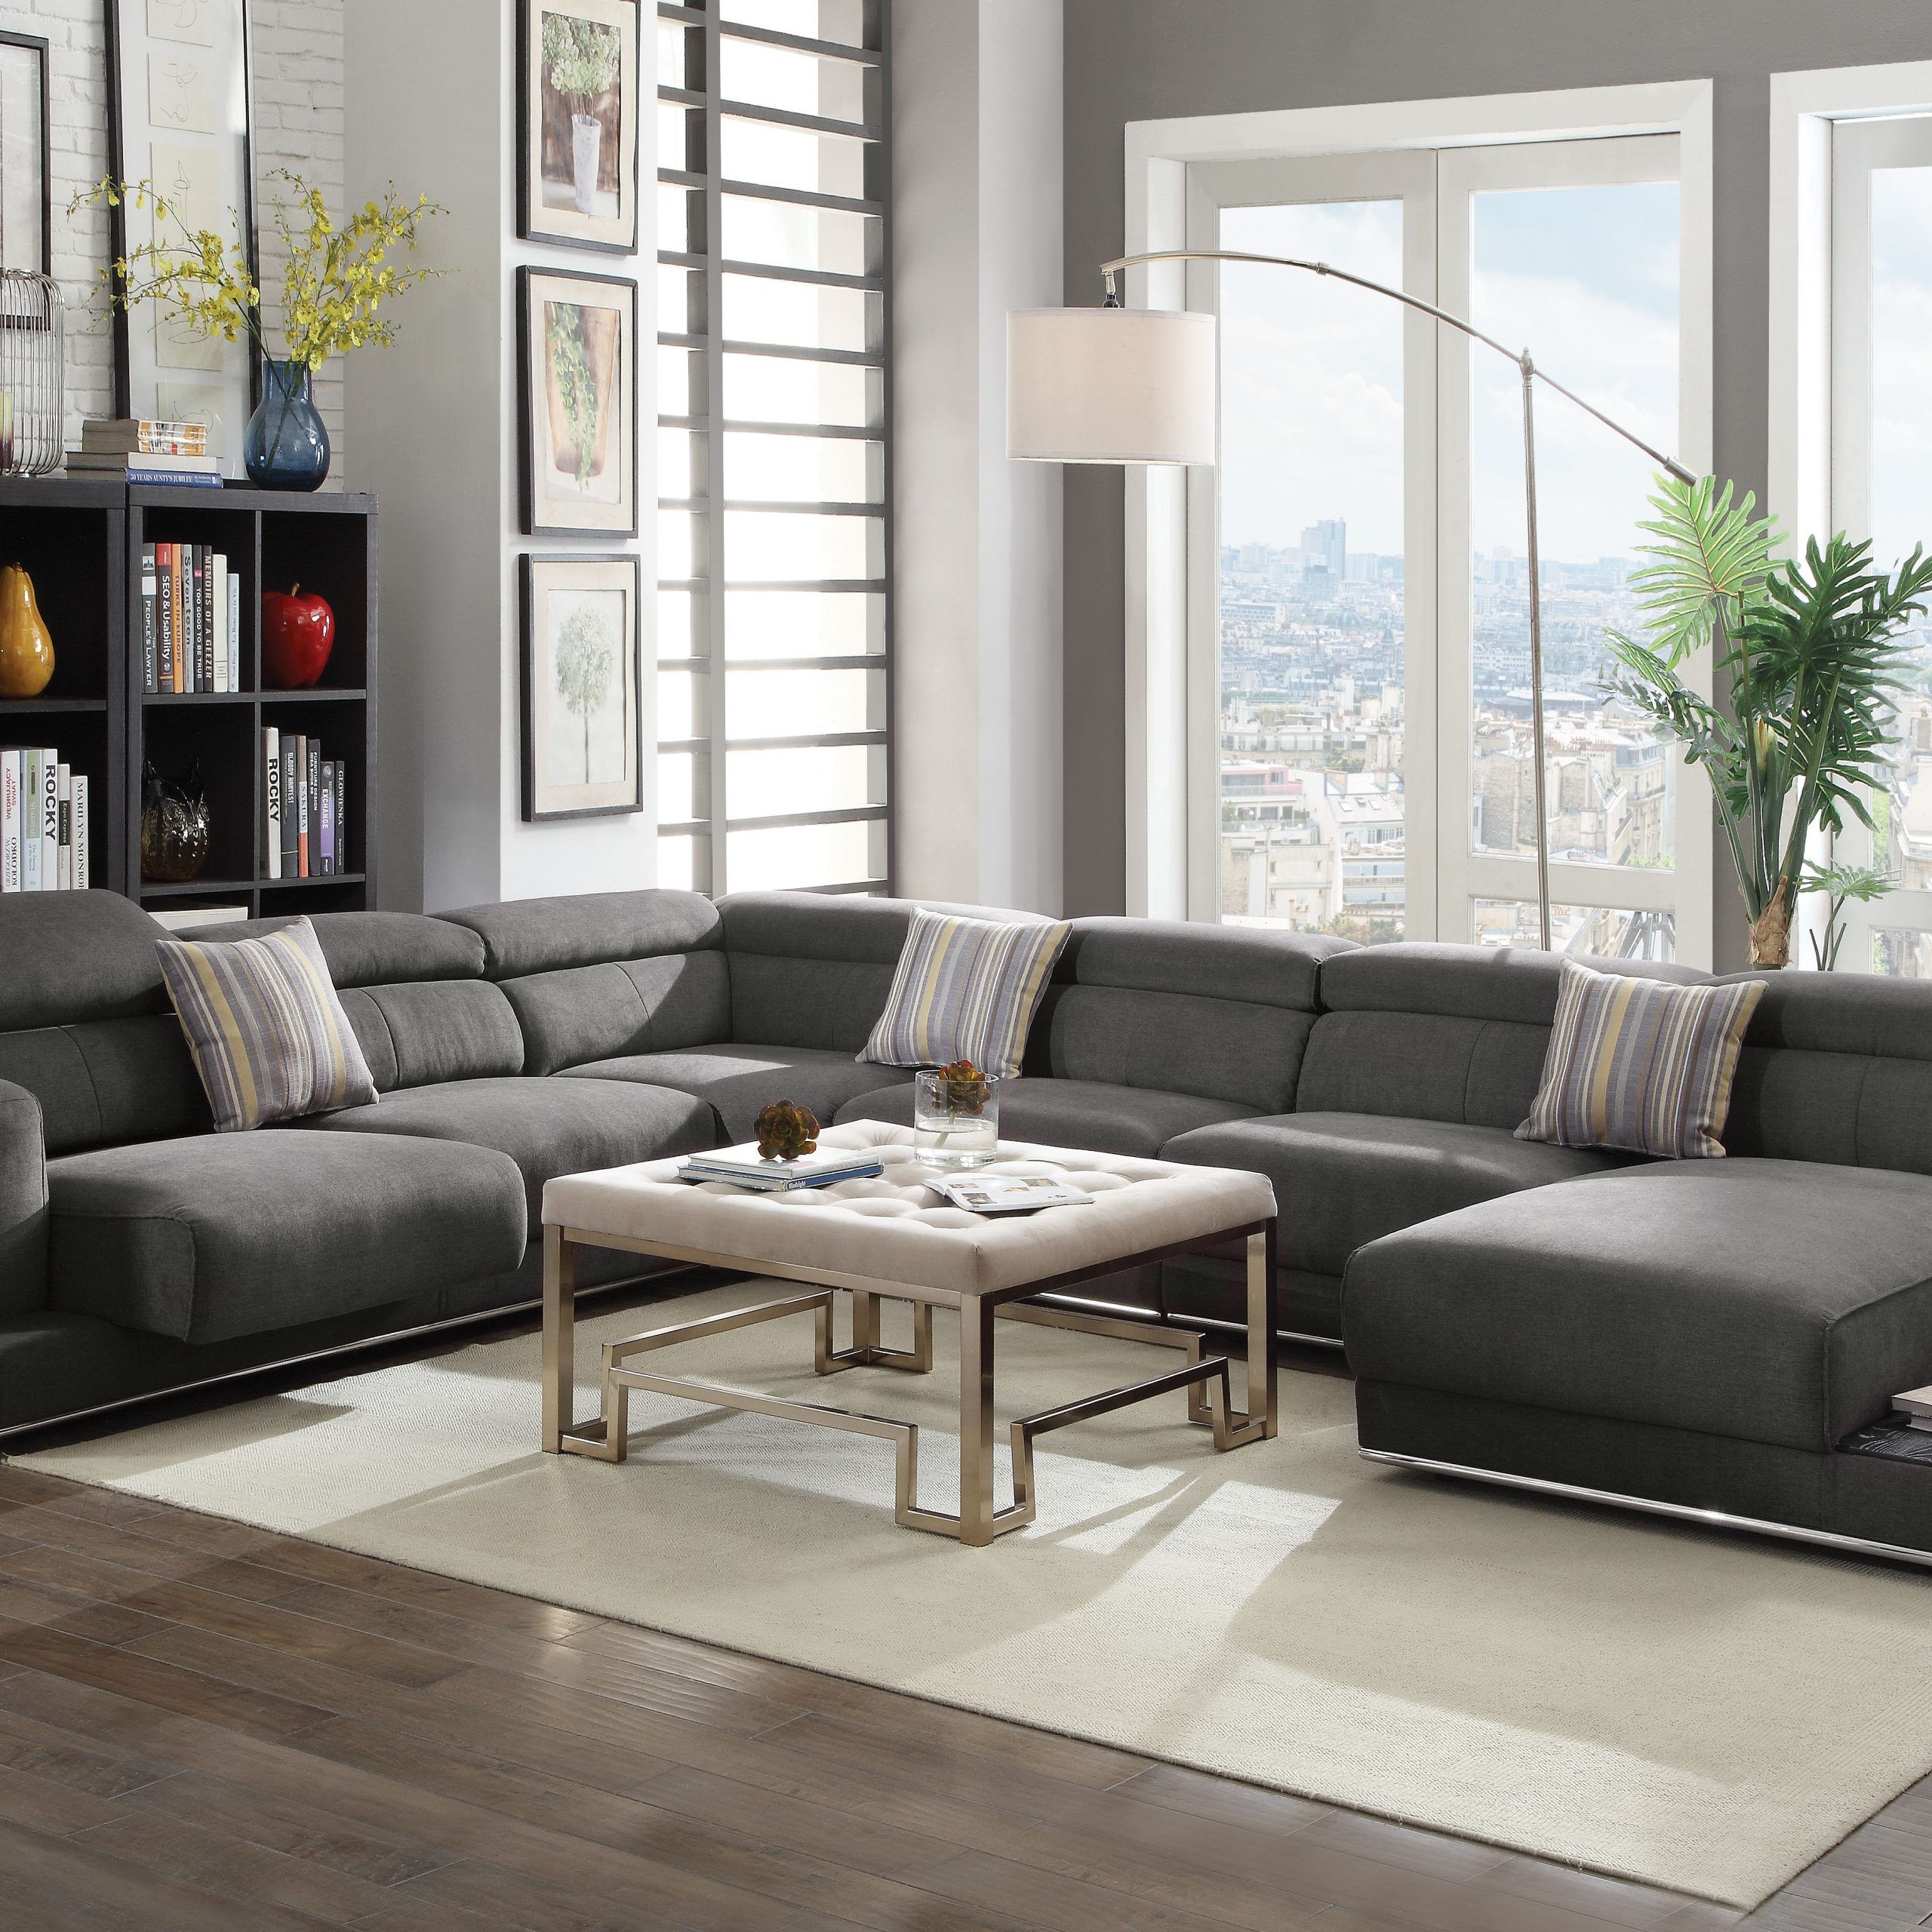 Acme Alwin Sectional Sofa In Dark Gray Fabric Upholstery With Regard To Polyfiber Linen Fabric Sectional Sofas Dark Gray (View 12 of 15)